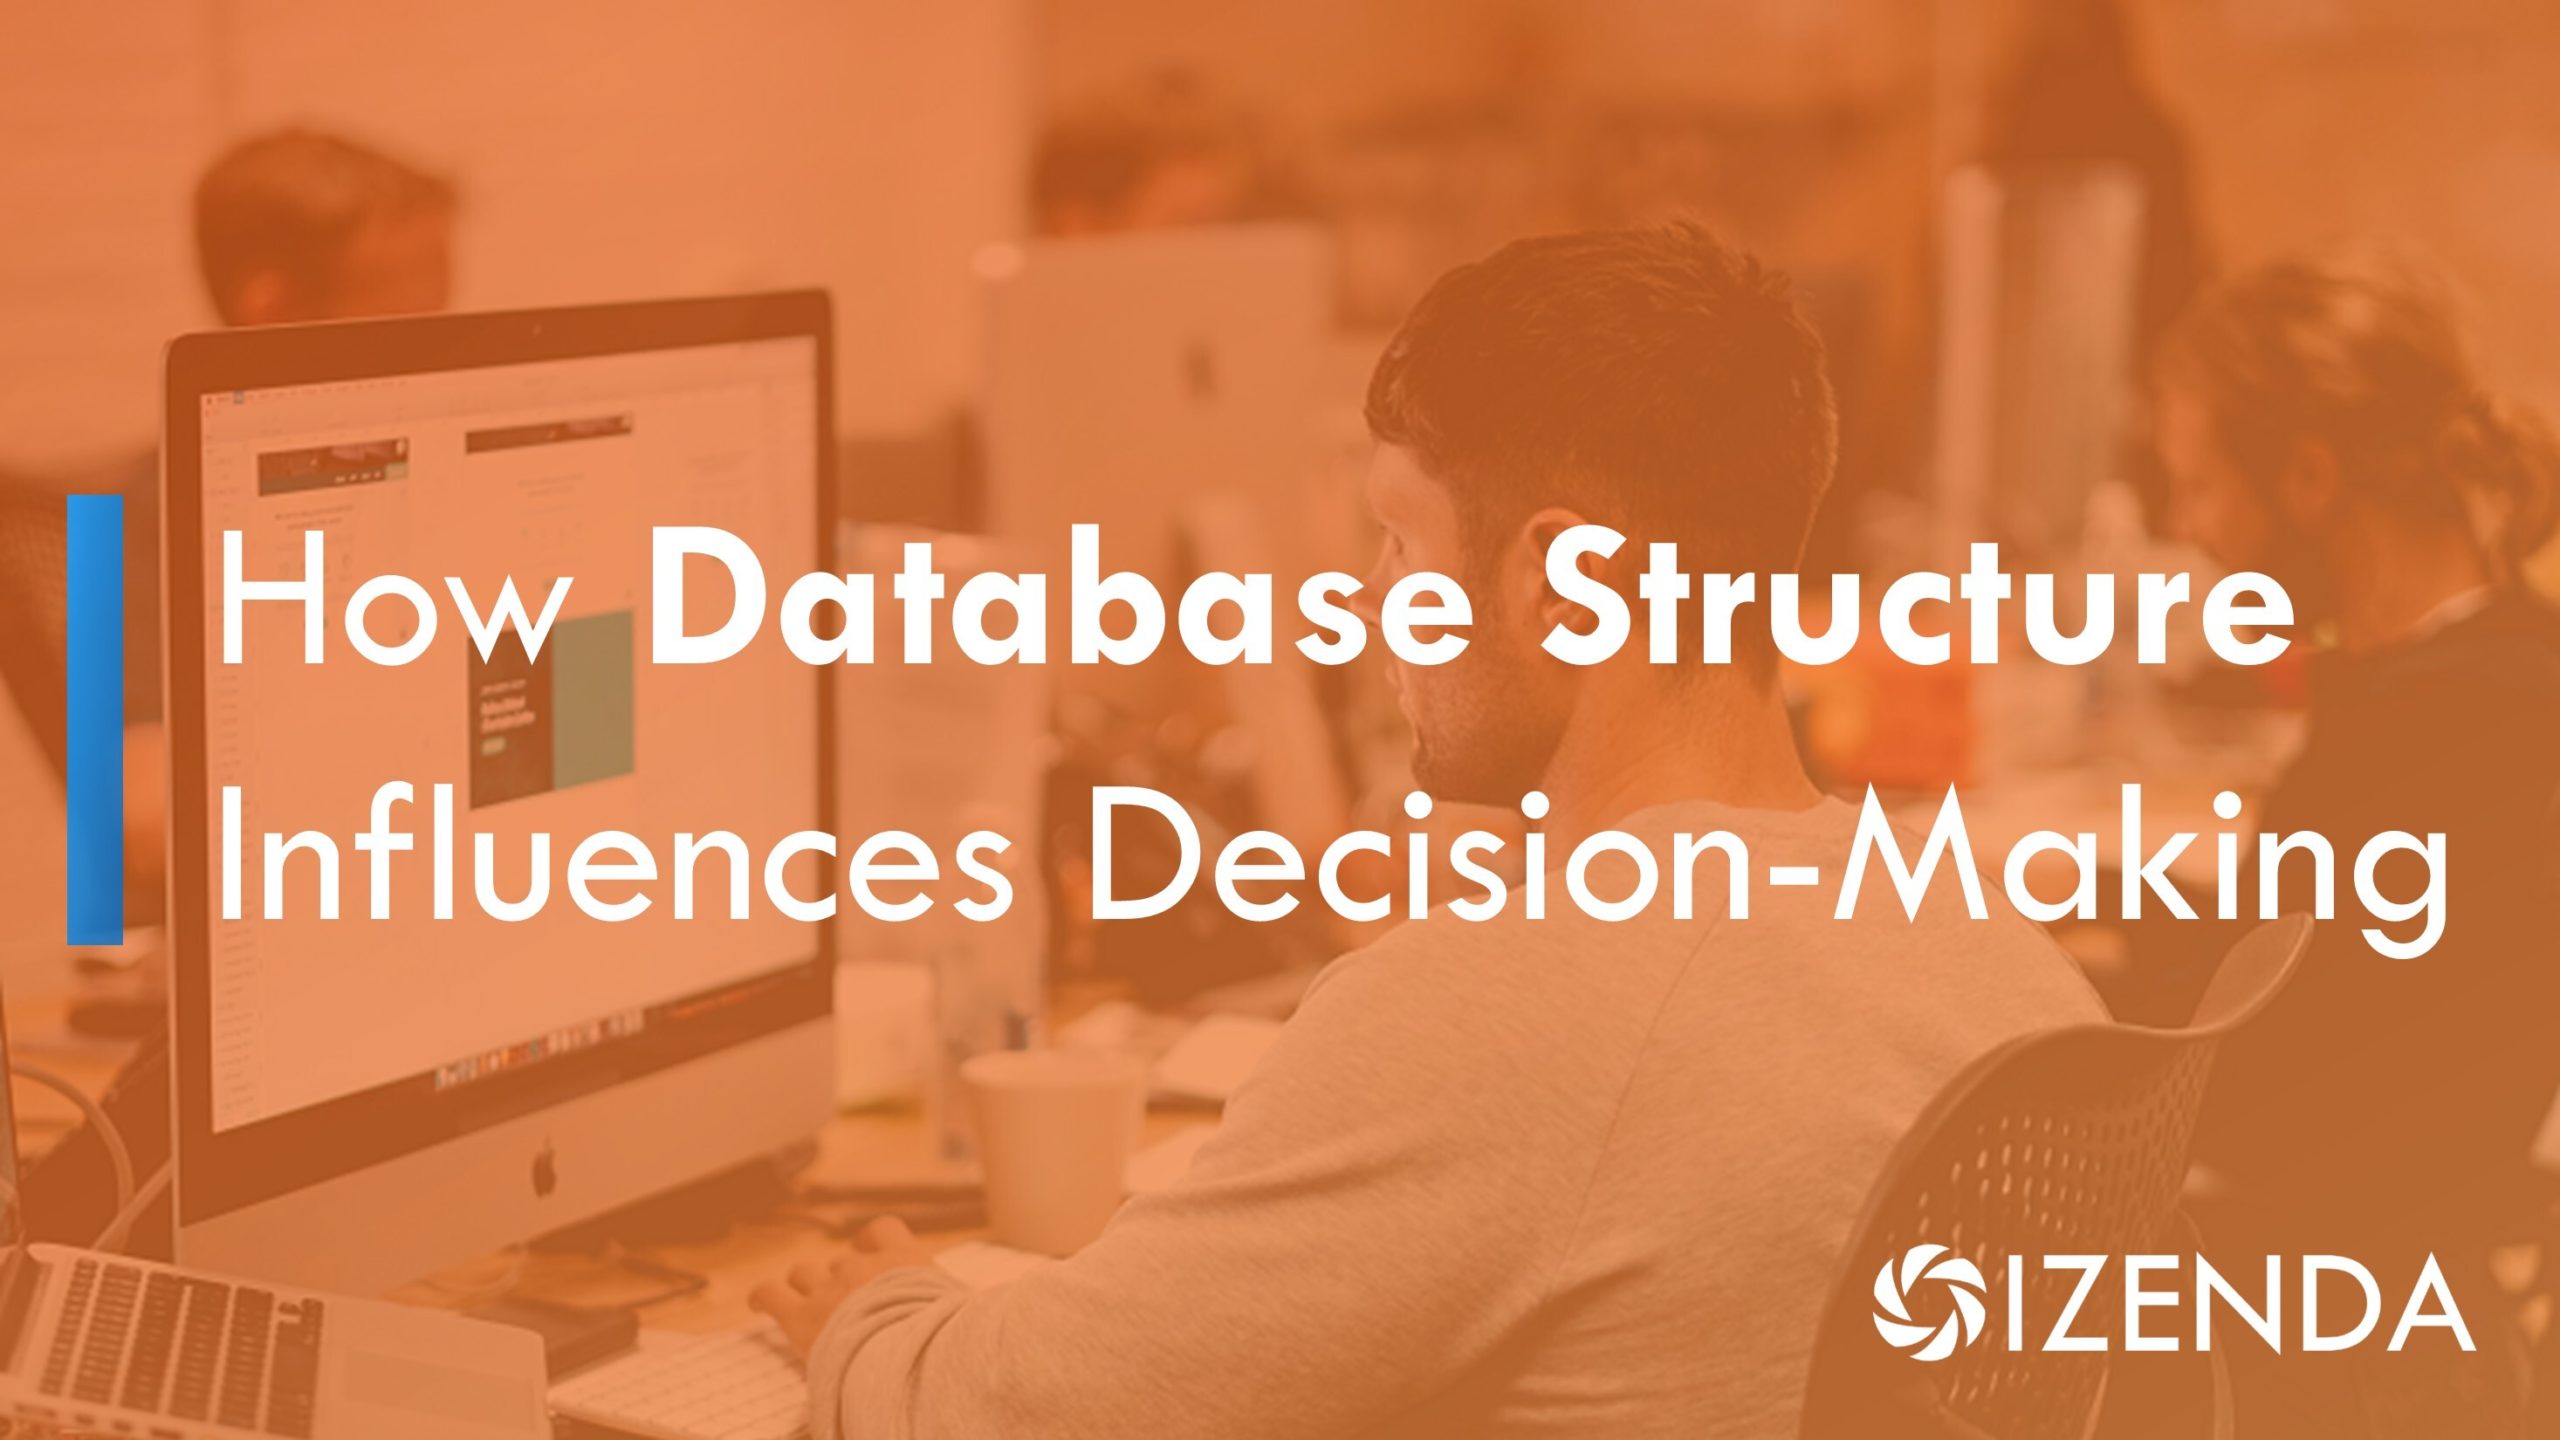 database structure can help or harm your decision-making